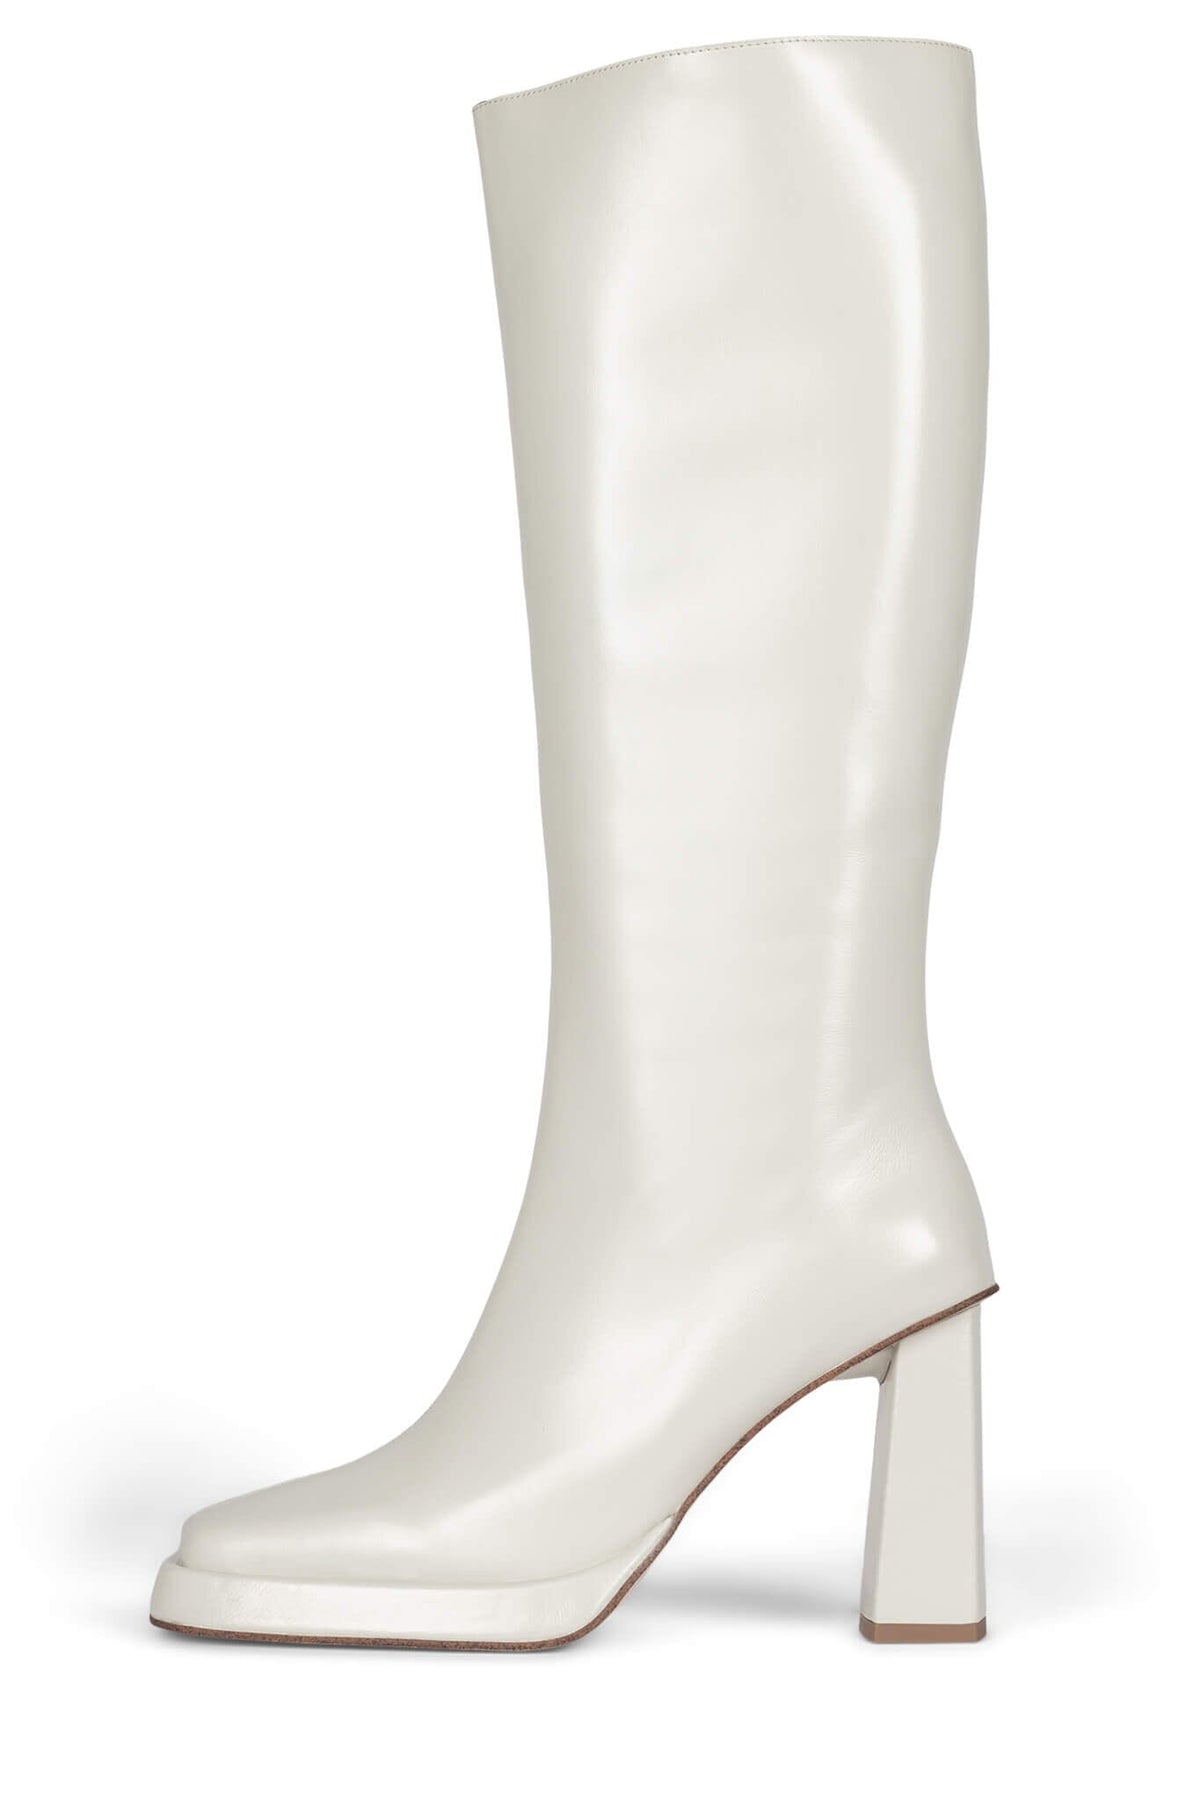 MAXIMAL Jeffrey Campbell Knee-High Boot Ivory